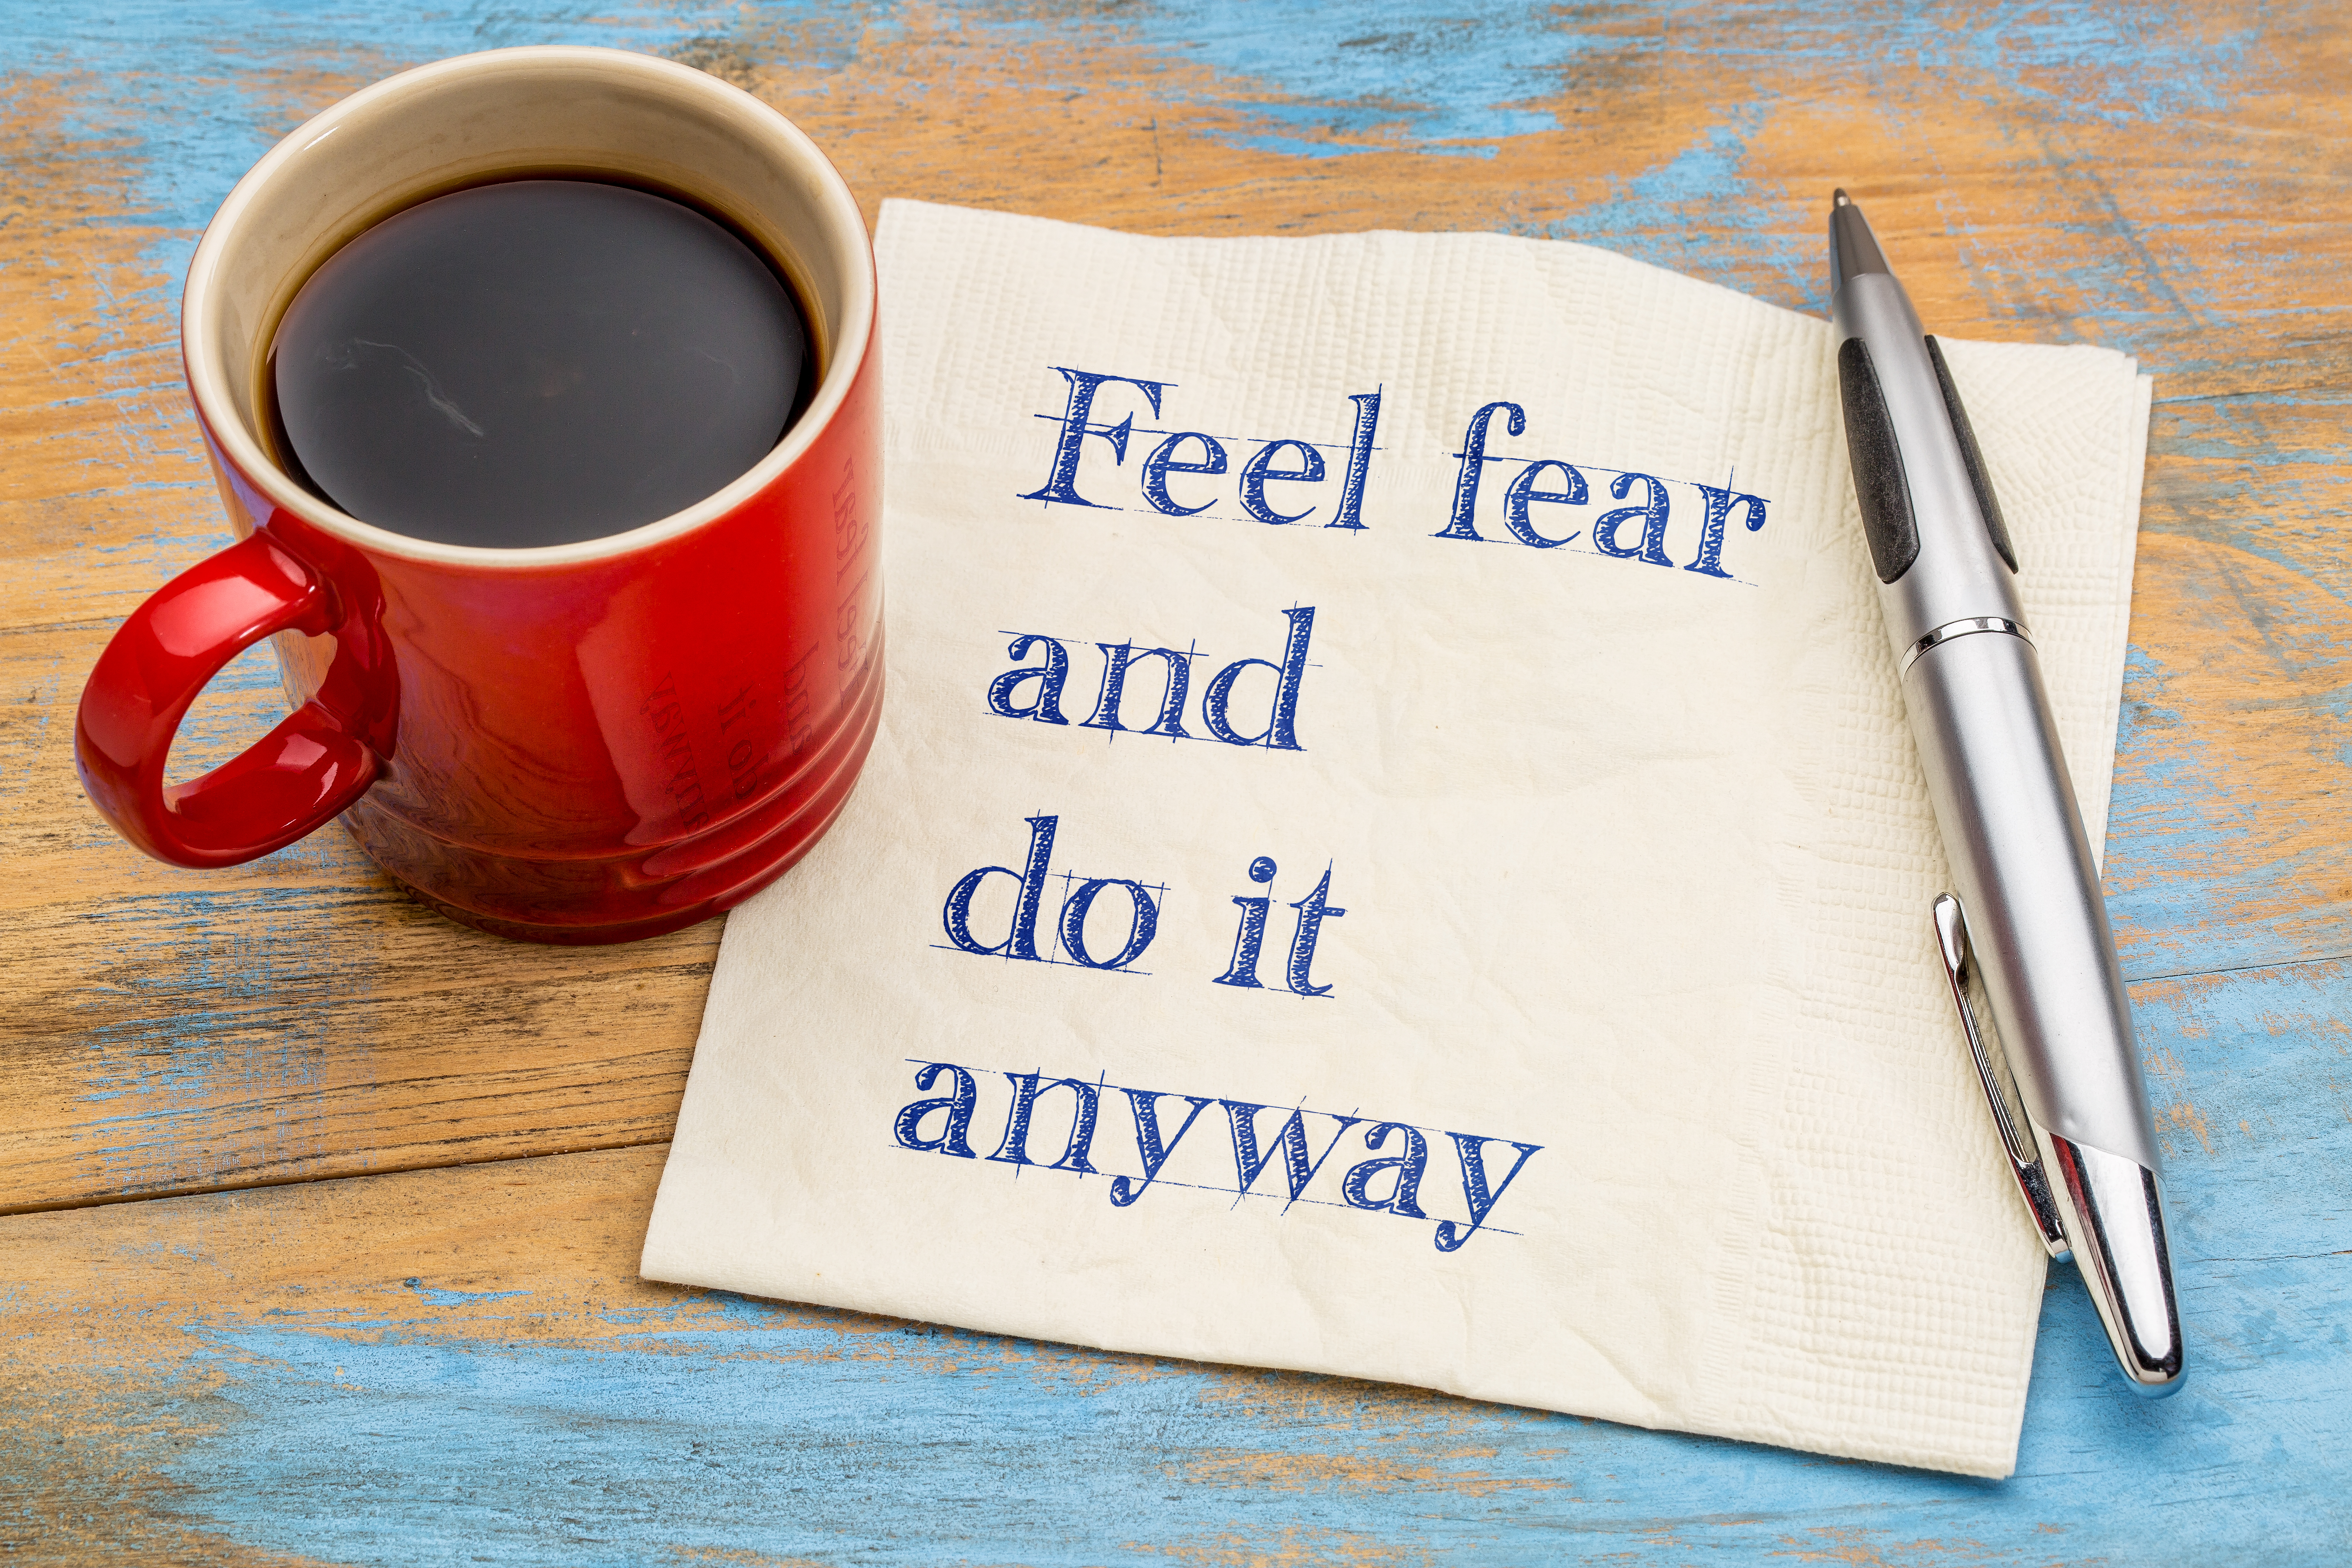 Feel fear and do it anyway - text on napkin